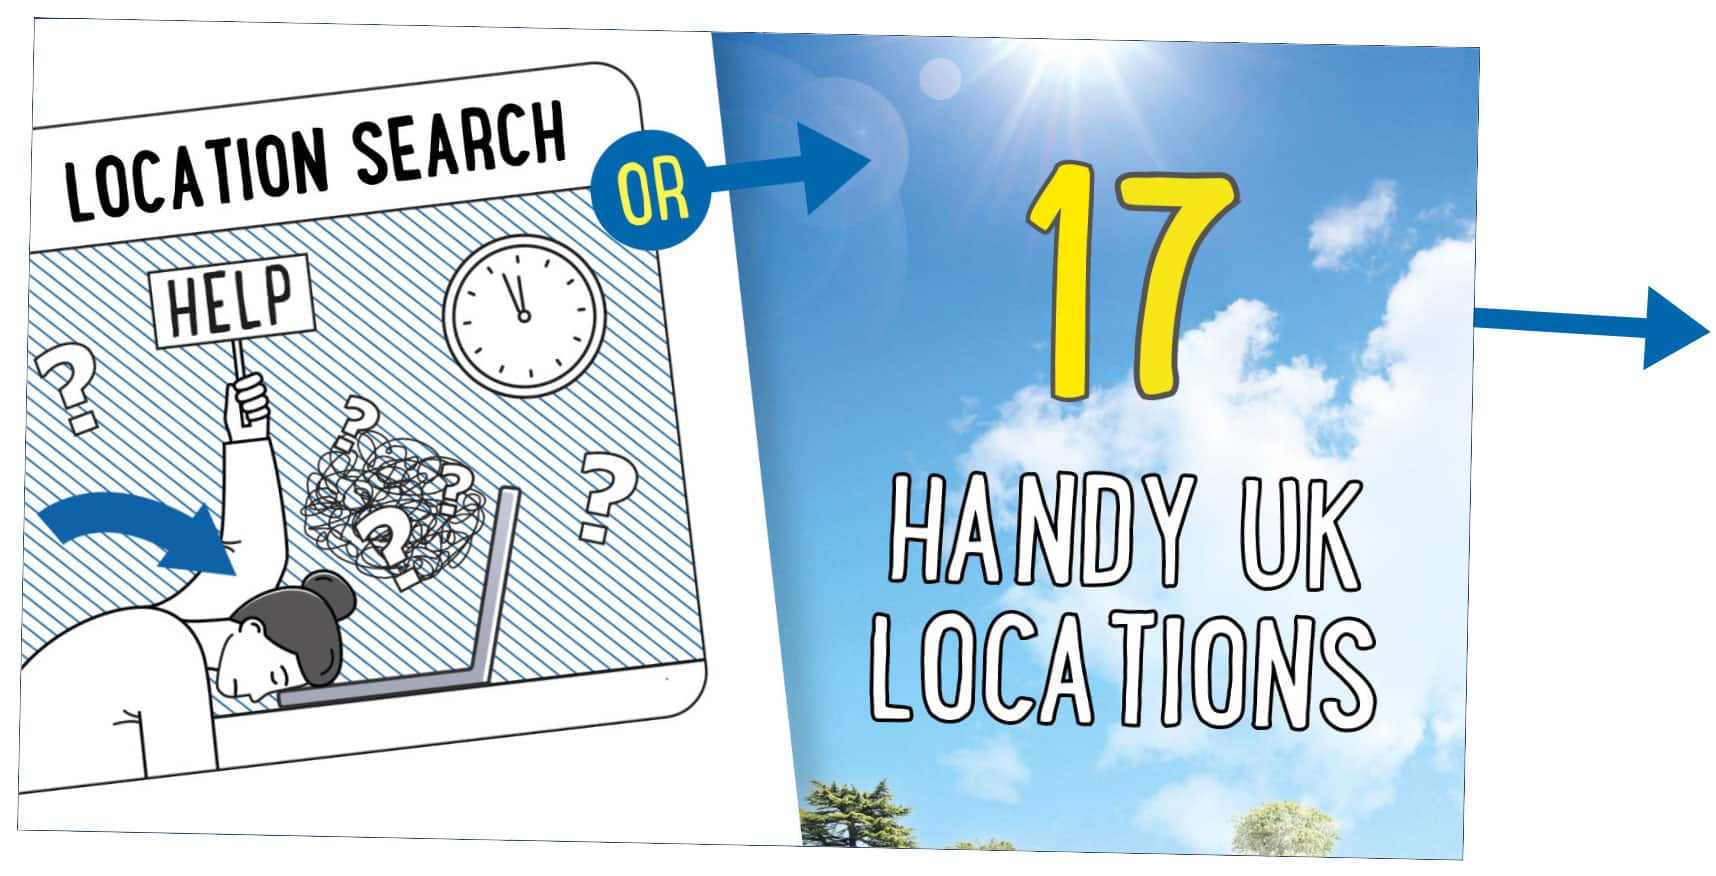 Search for a location or look at our 17 handy locations for PGL centres.